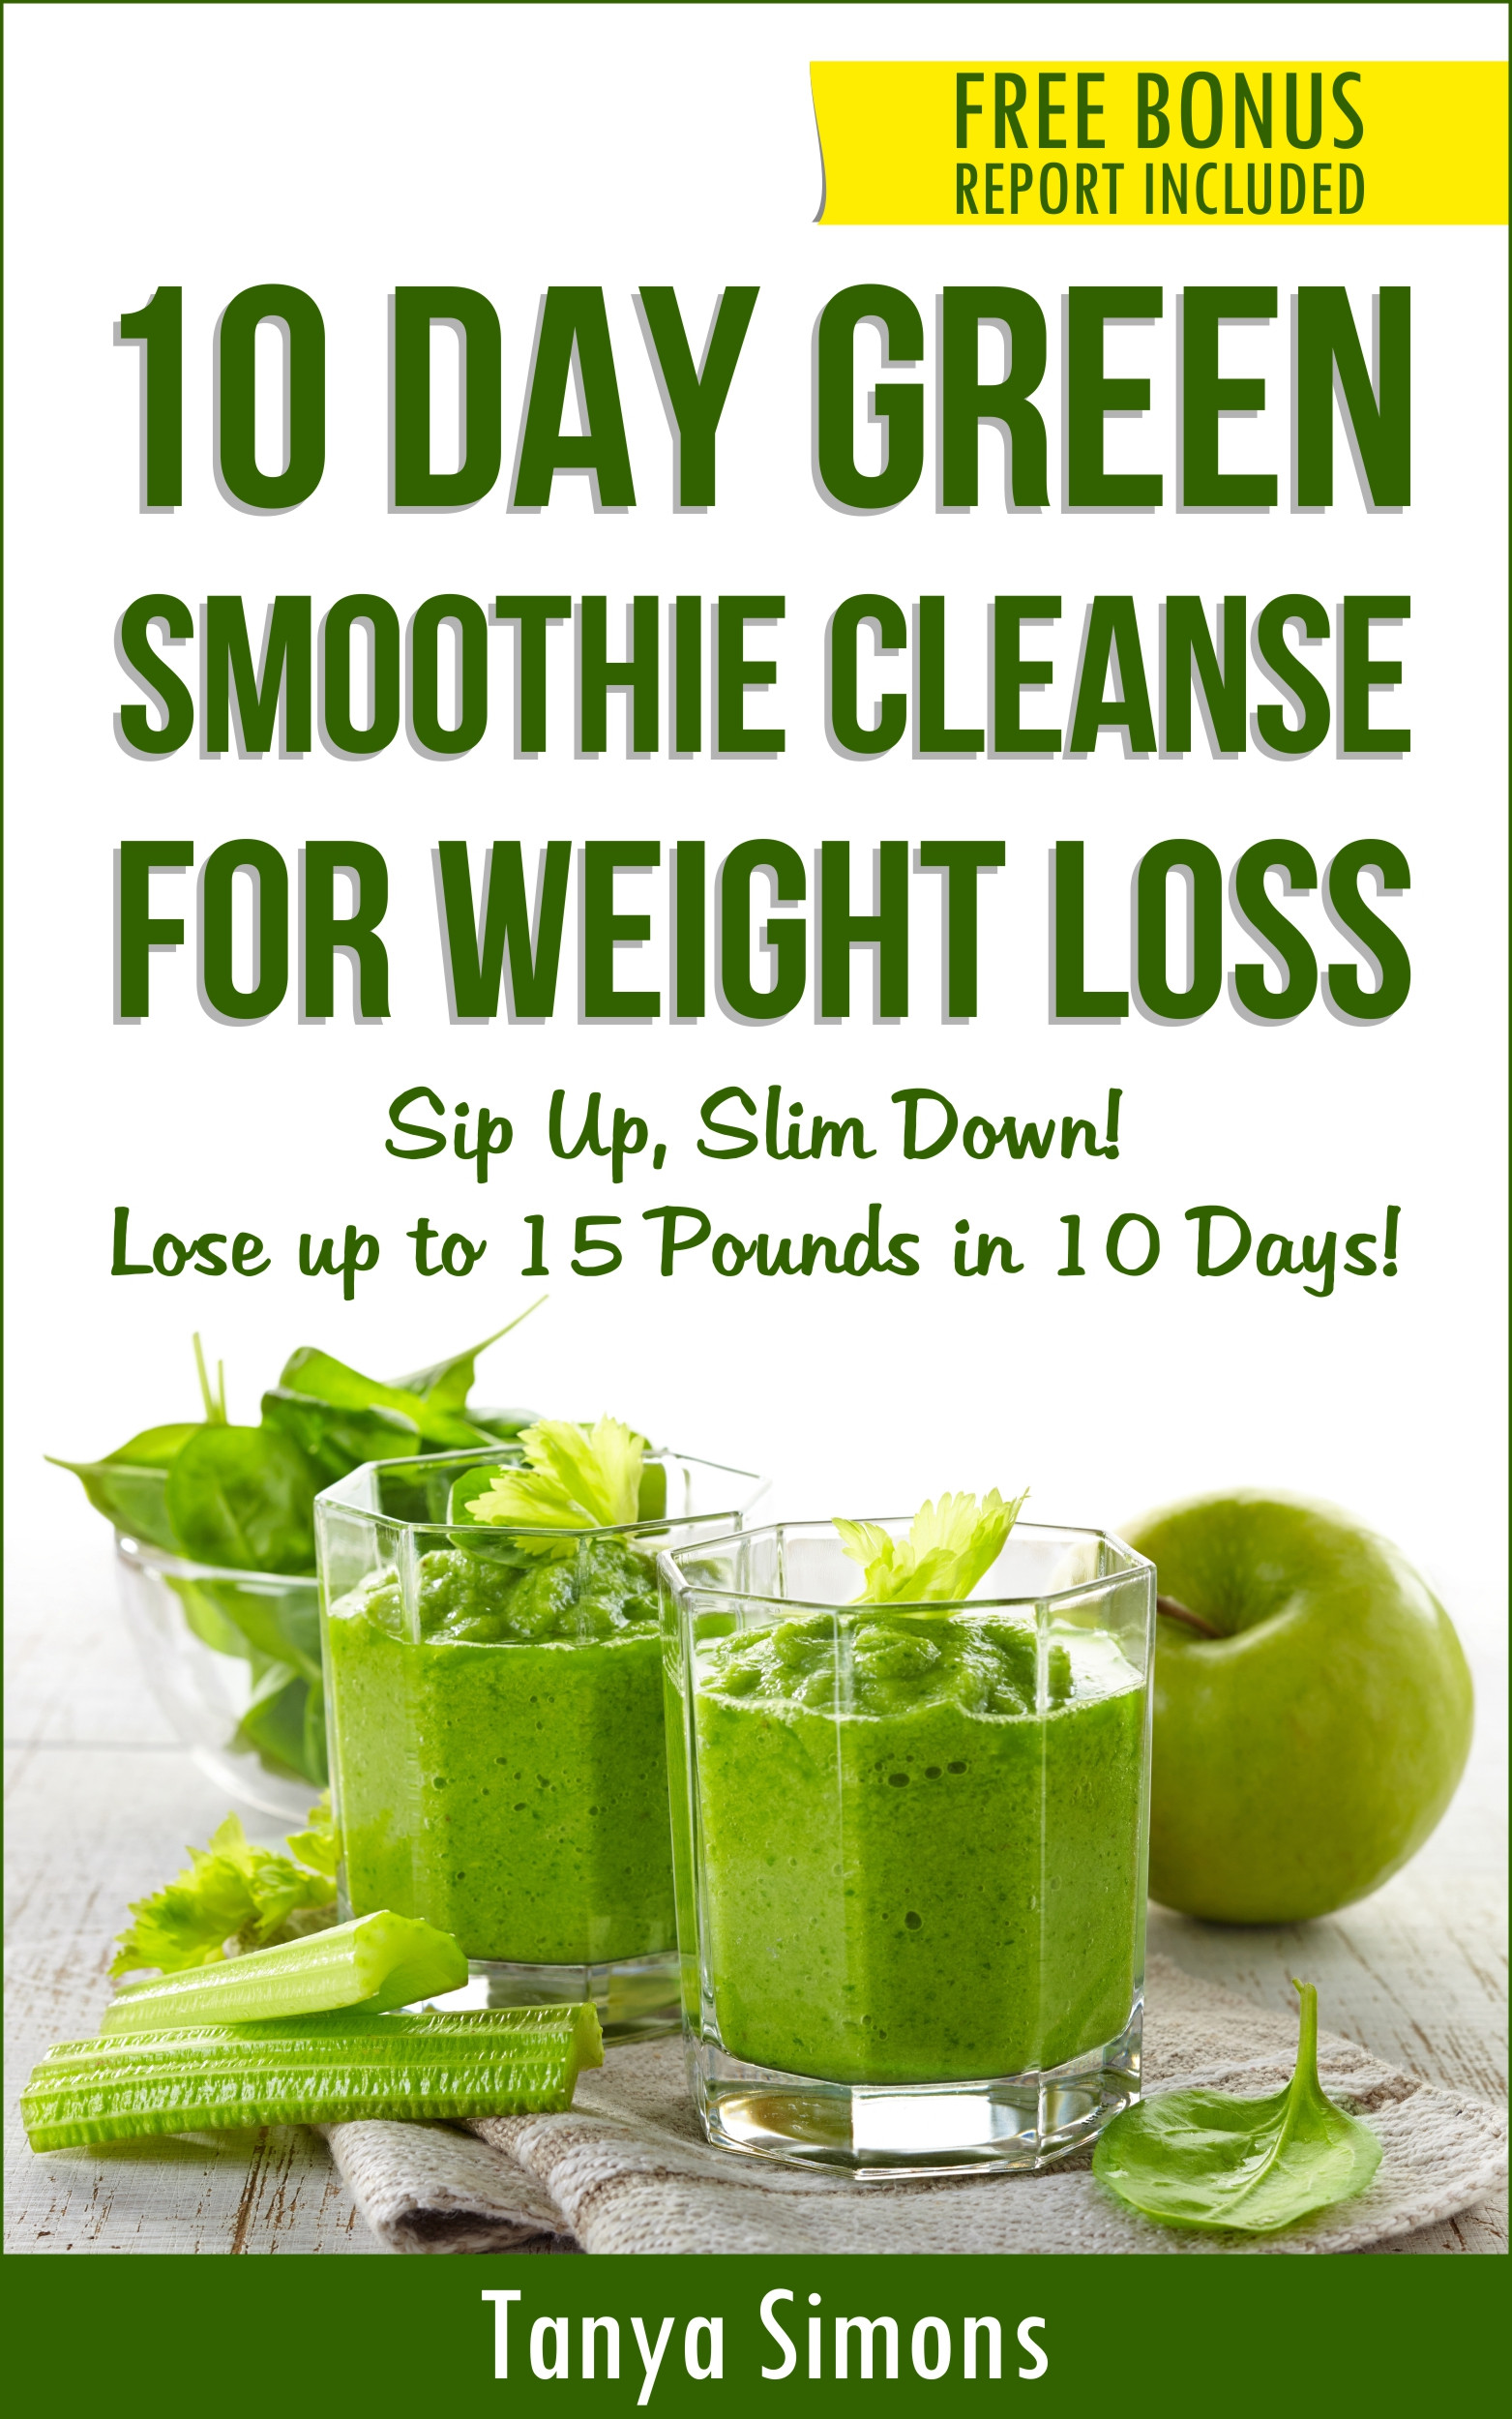 Recipes For Green Smoothies For Weight Loss
 10 Day Green Smoothie Cleanse Lose 15lbs with 10 Day